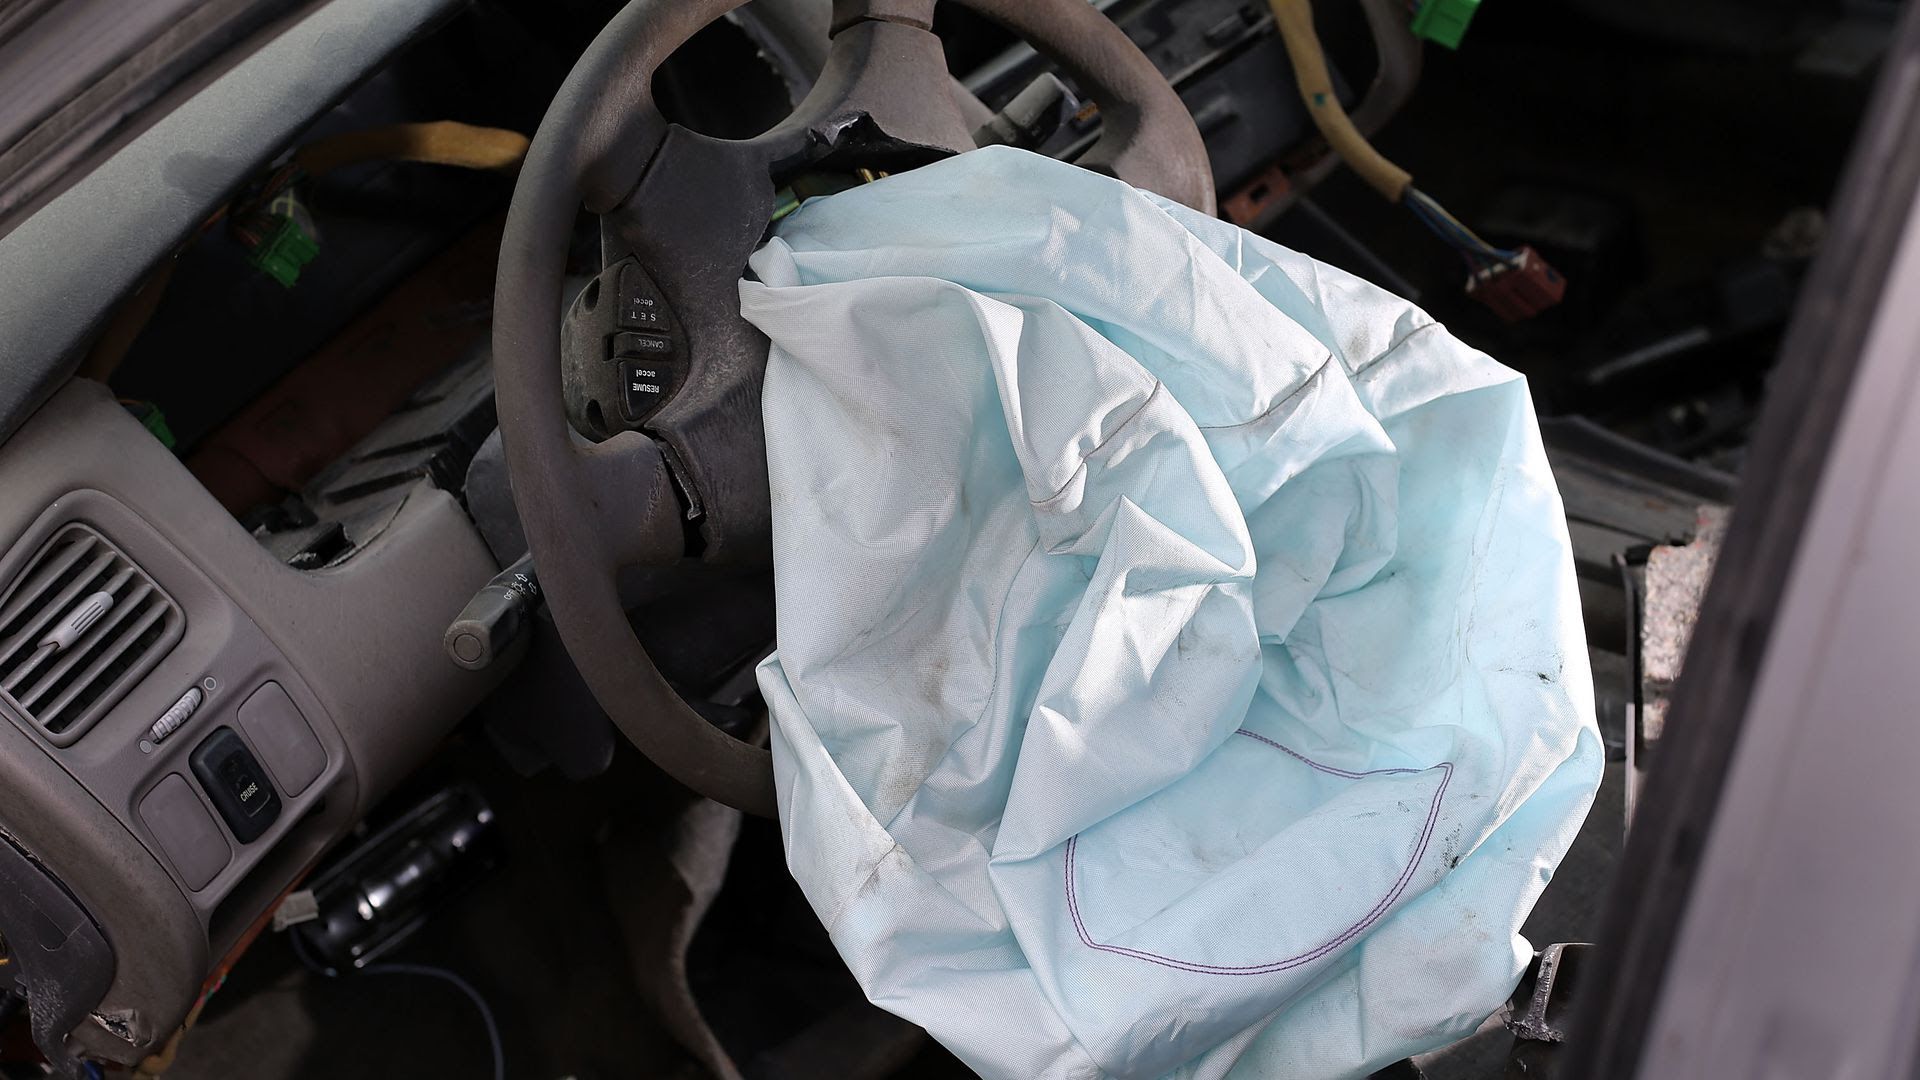 A deployed airbag.